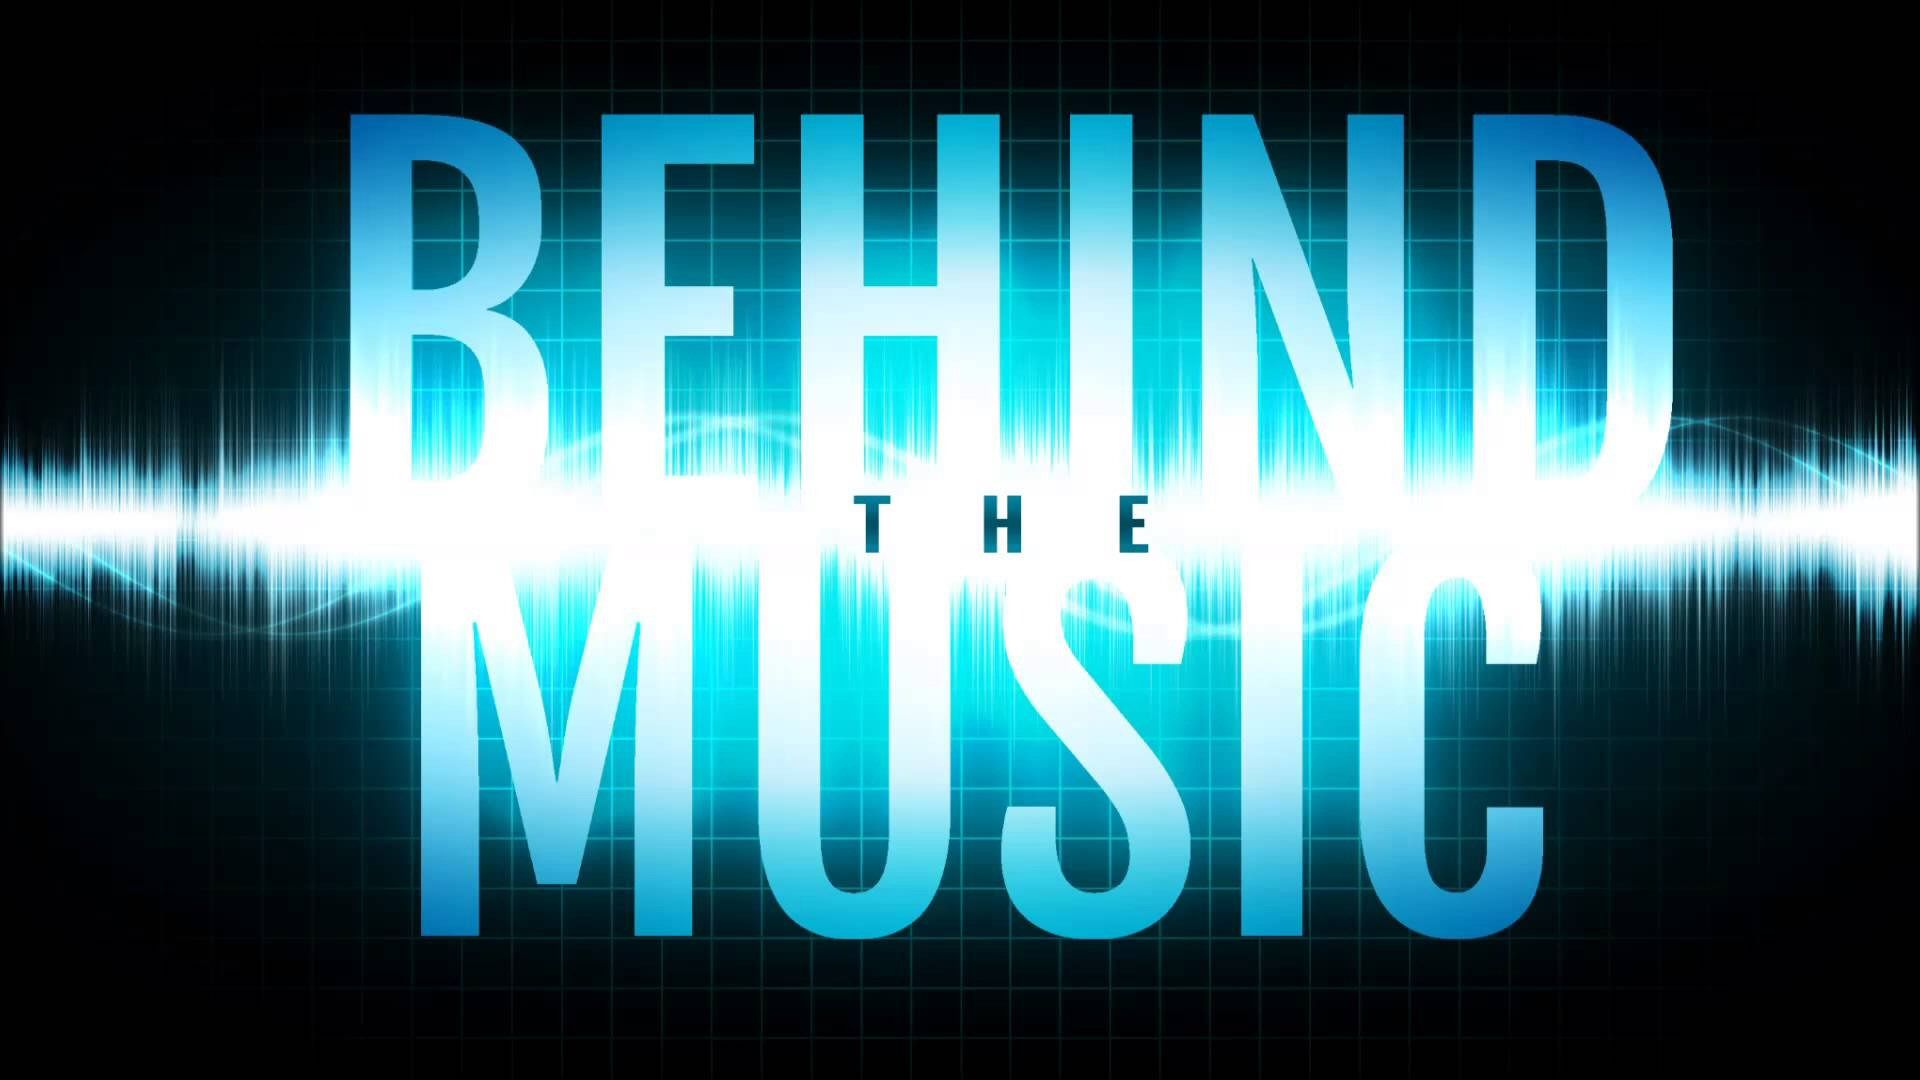 Season 10, Episode 01 New Kids on the Block: A Behind the Music Special Event